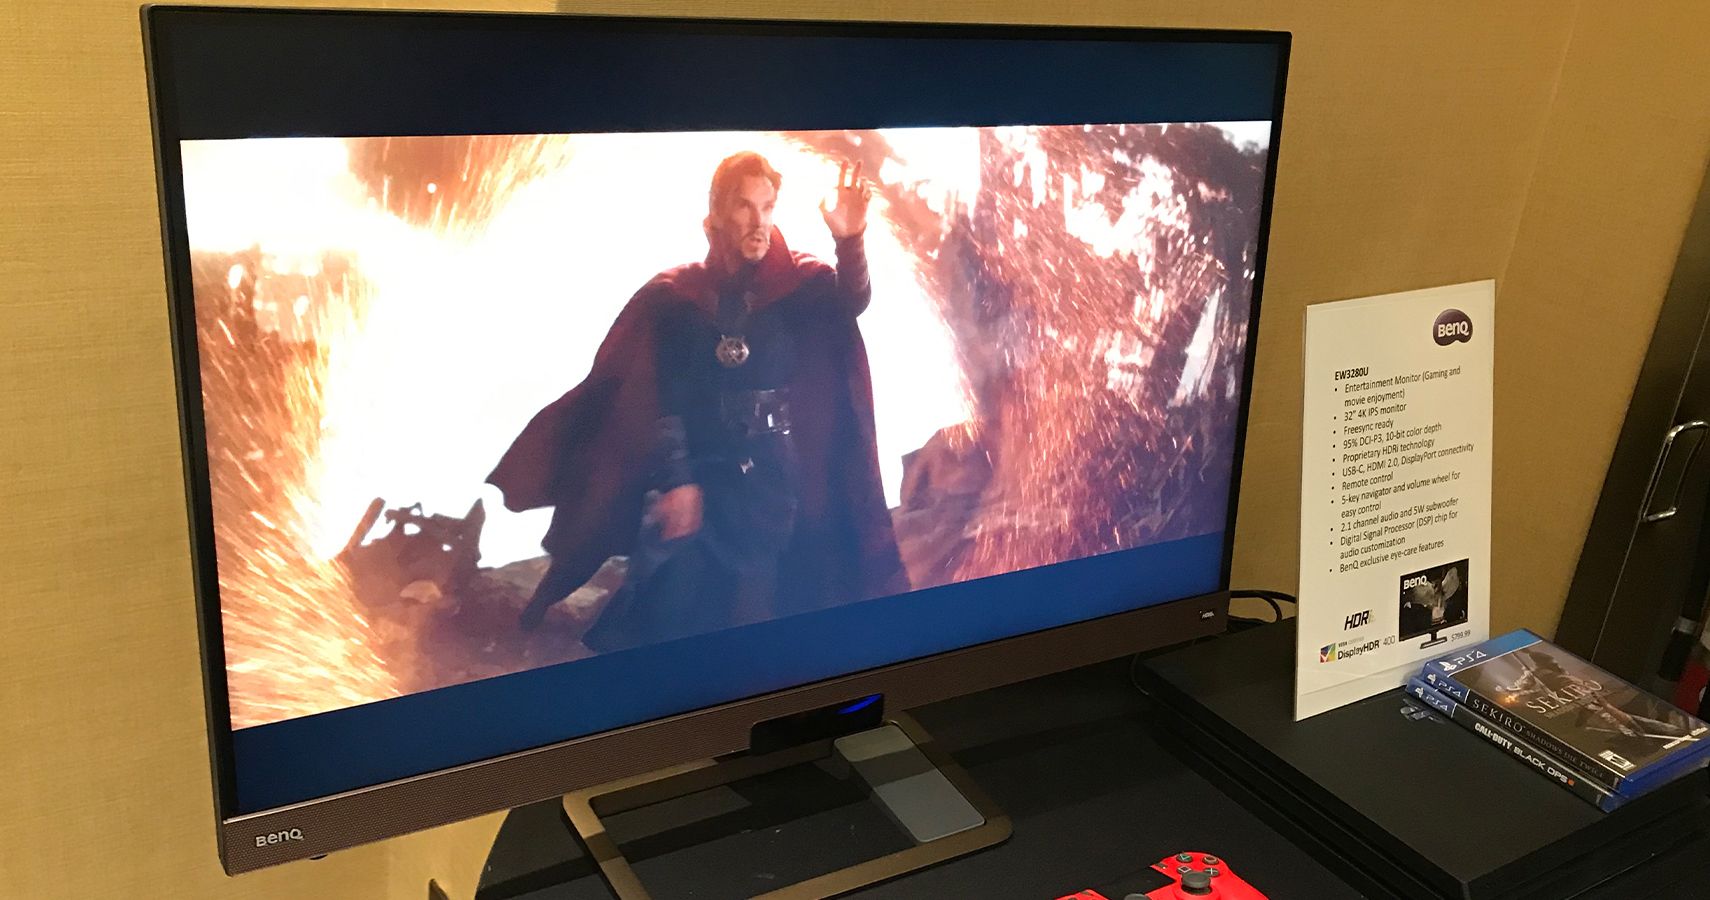 BenQ 32-inch Entertainment Monitor showing an action scene.